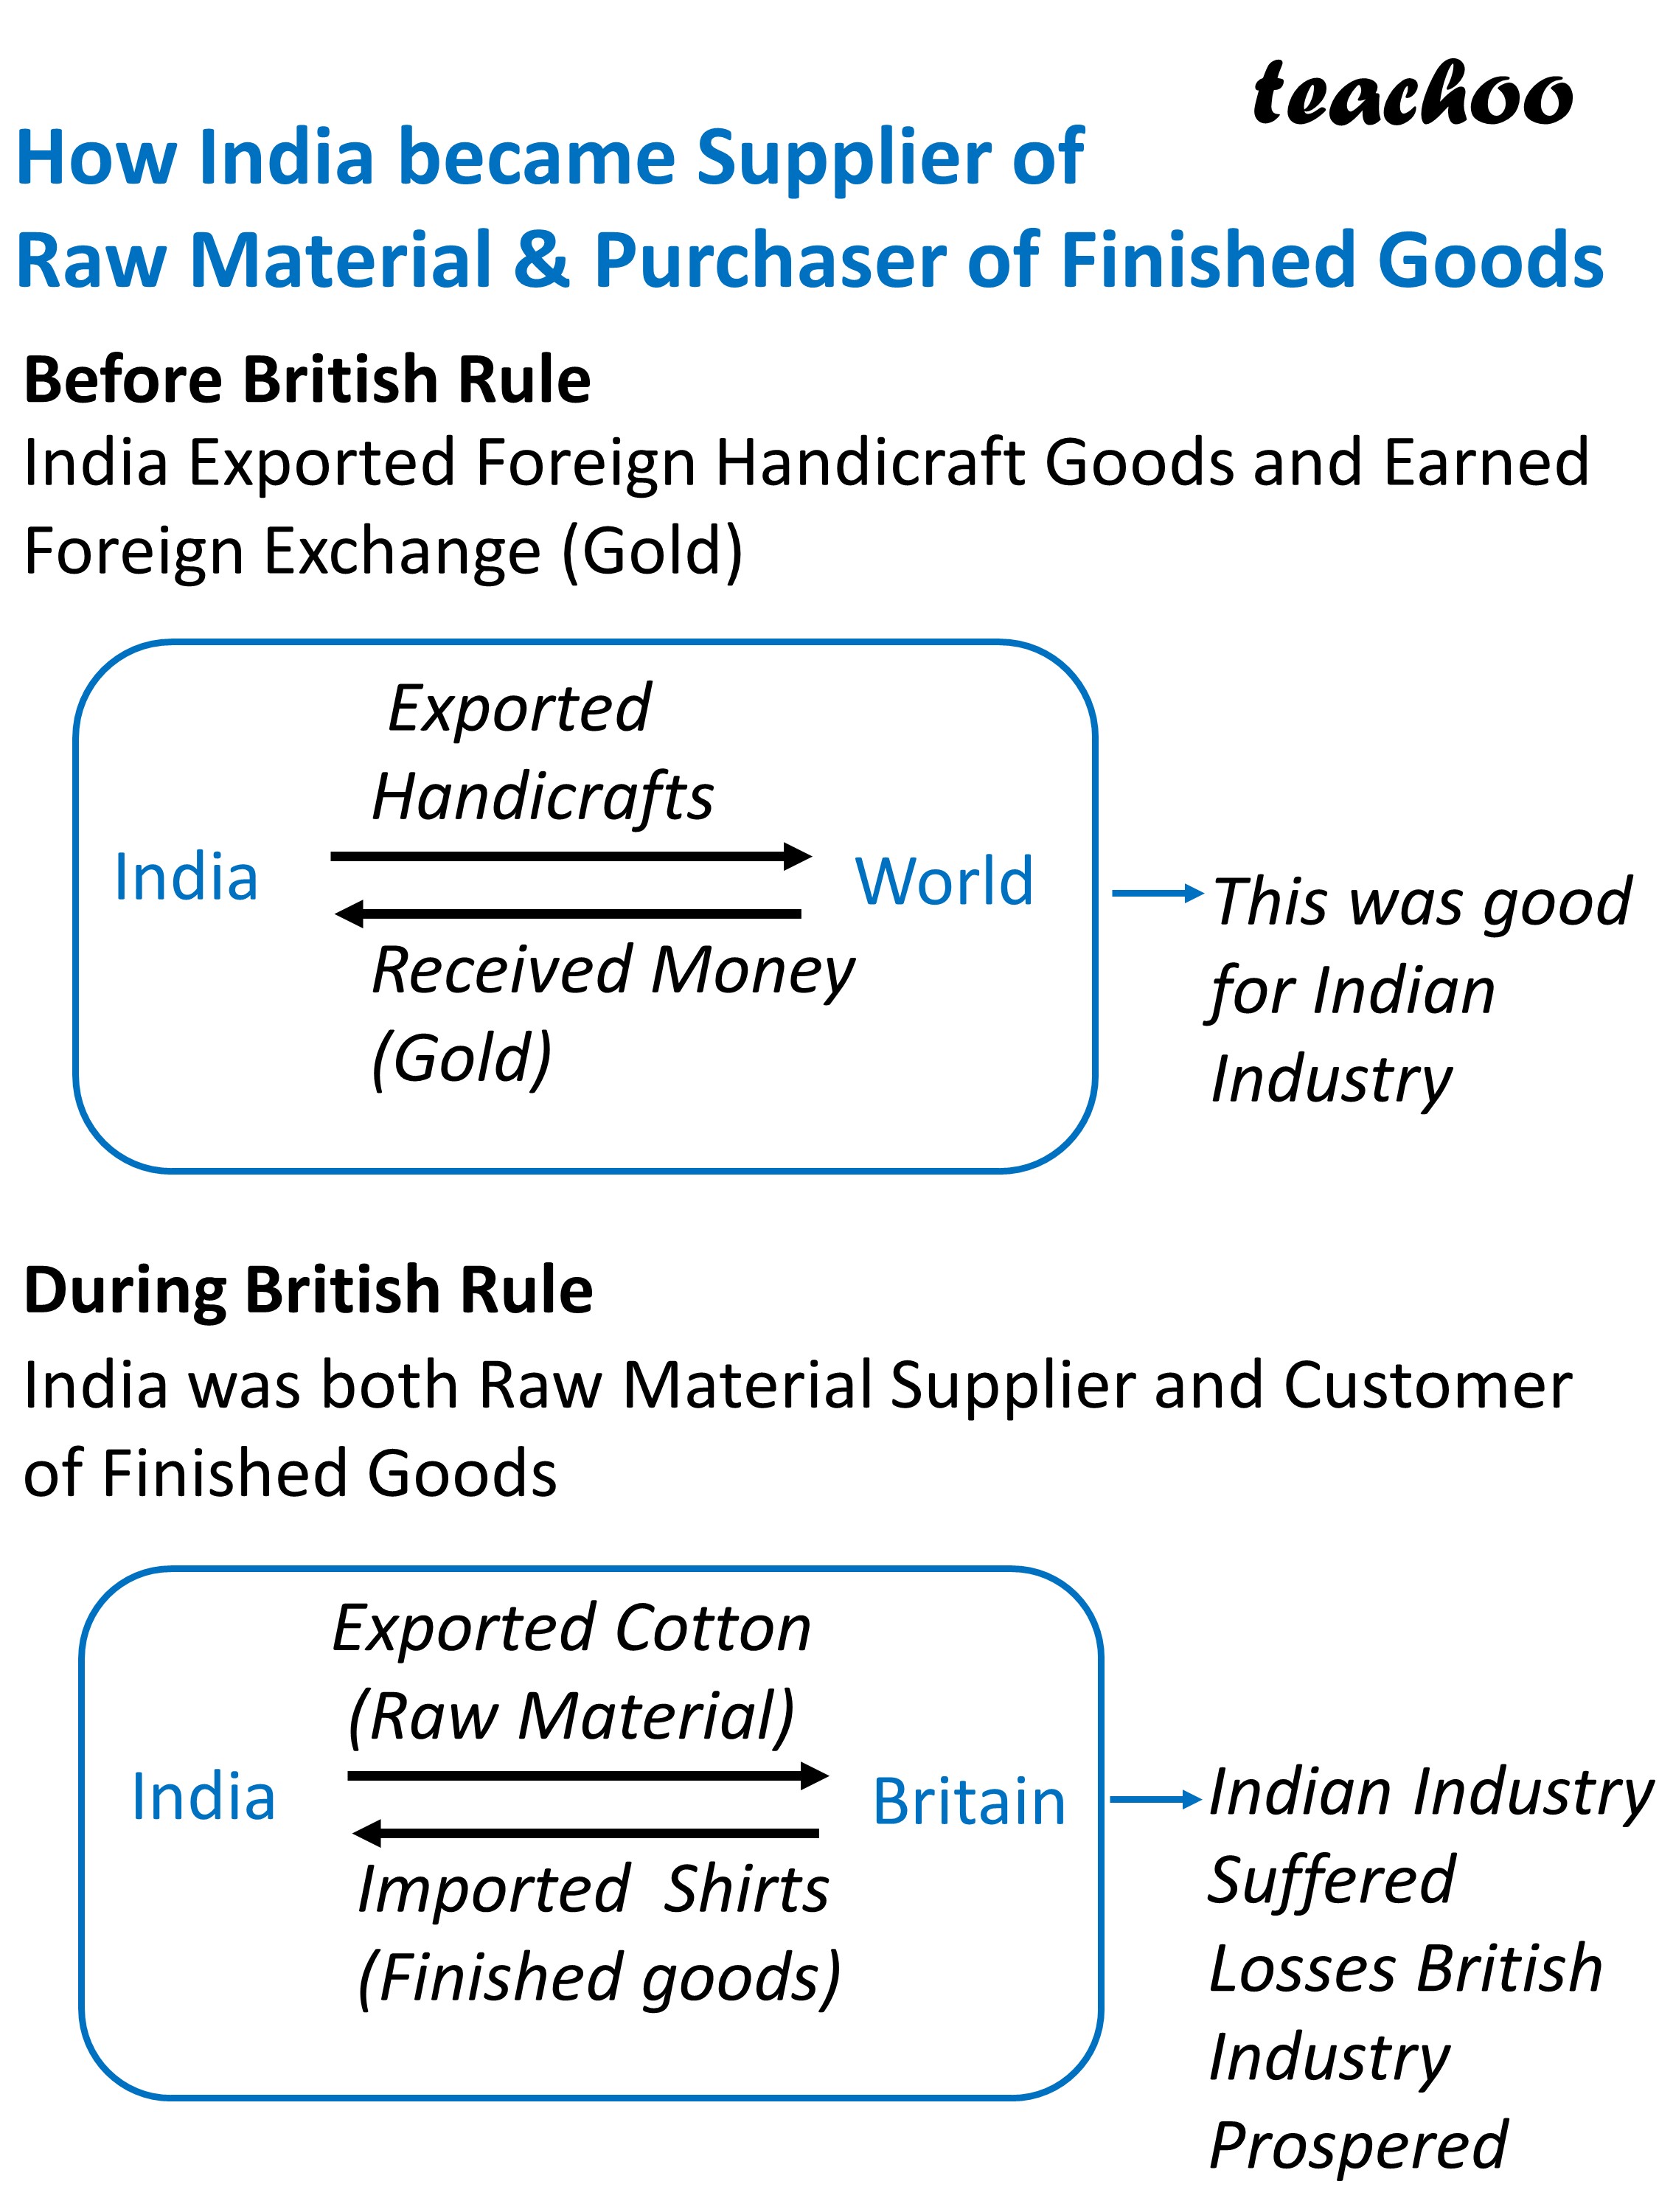 How India became Supplier of Raw Material & Purchaser of Finished Goods - Teachoo.JPG